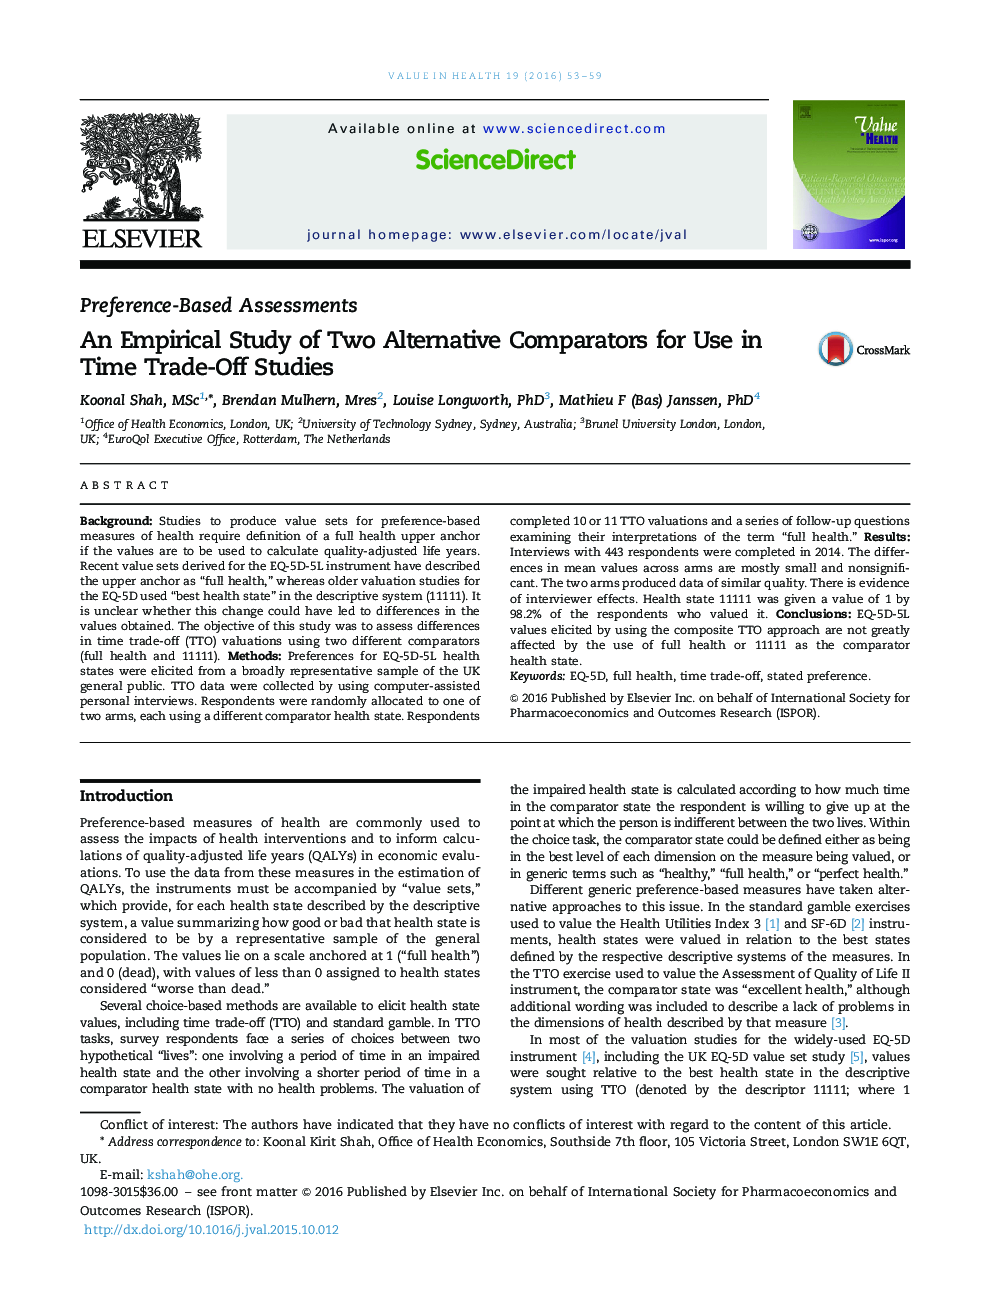 An Empirical Study of Two Alternative Comparators for Use in Time Trade-Off Studies